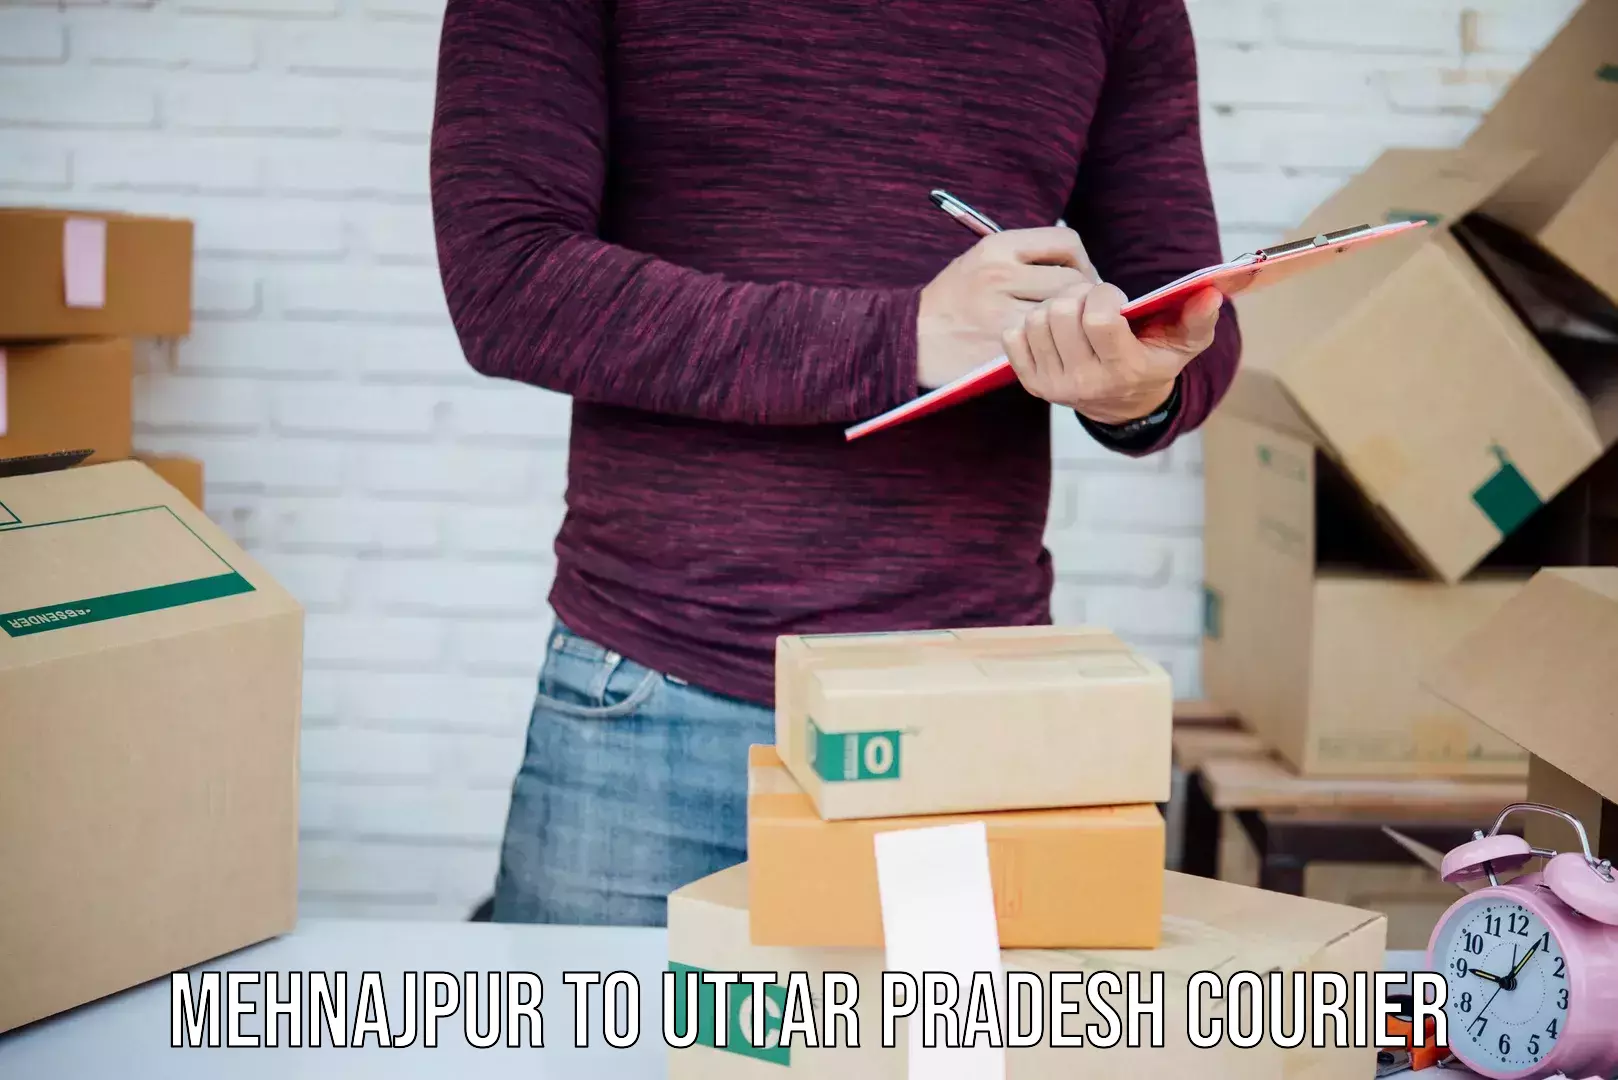 Quality courier services Mehnajpur to Ayodhya